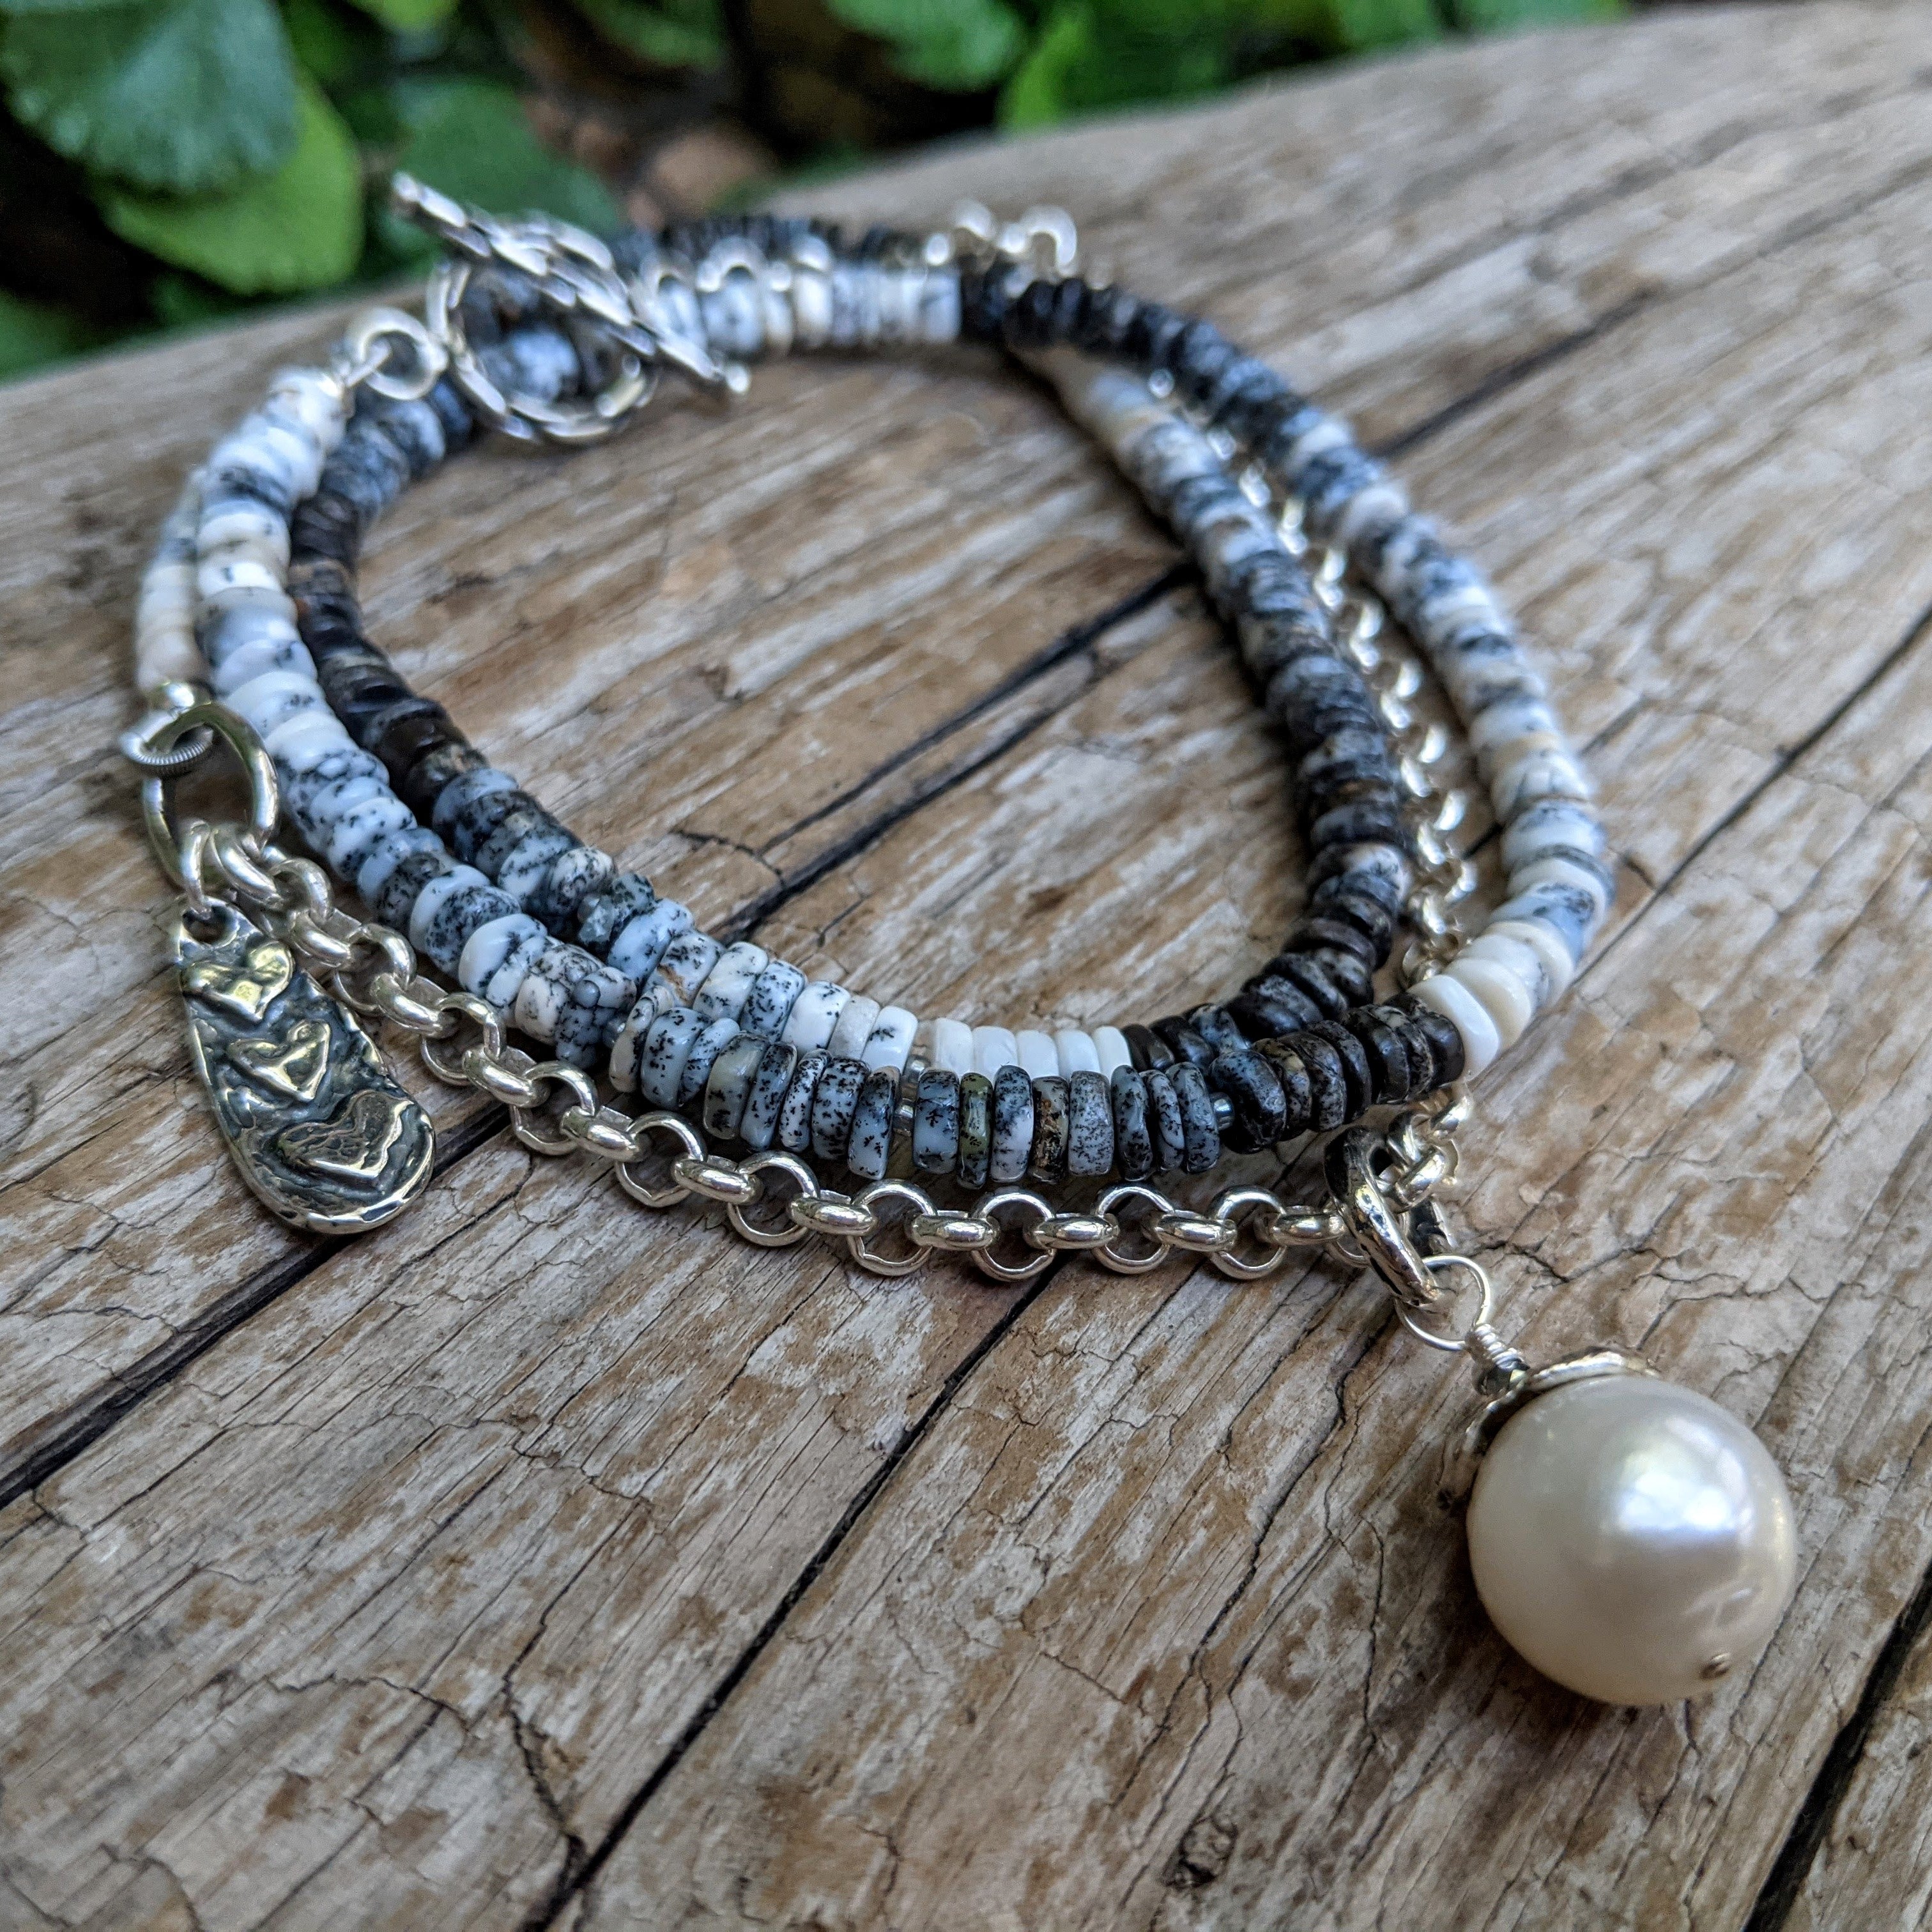 Handmade artisan long grey gemstone  necklace with dendritic opal, white Edison pearl pendant and sterling silver, design and handcrafted by Aurora Creative Jewellery.